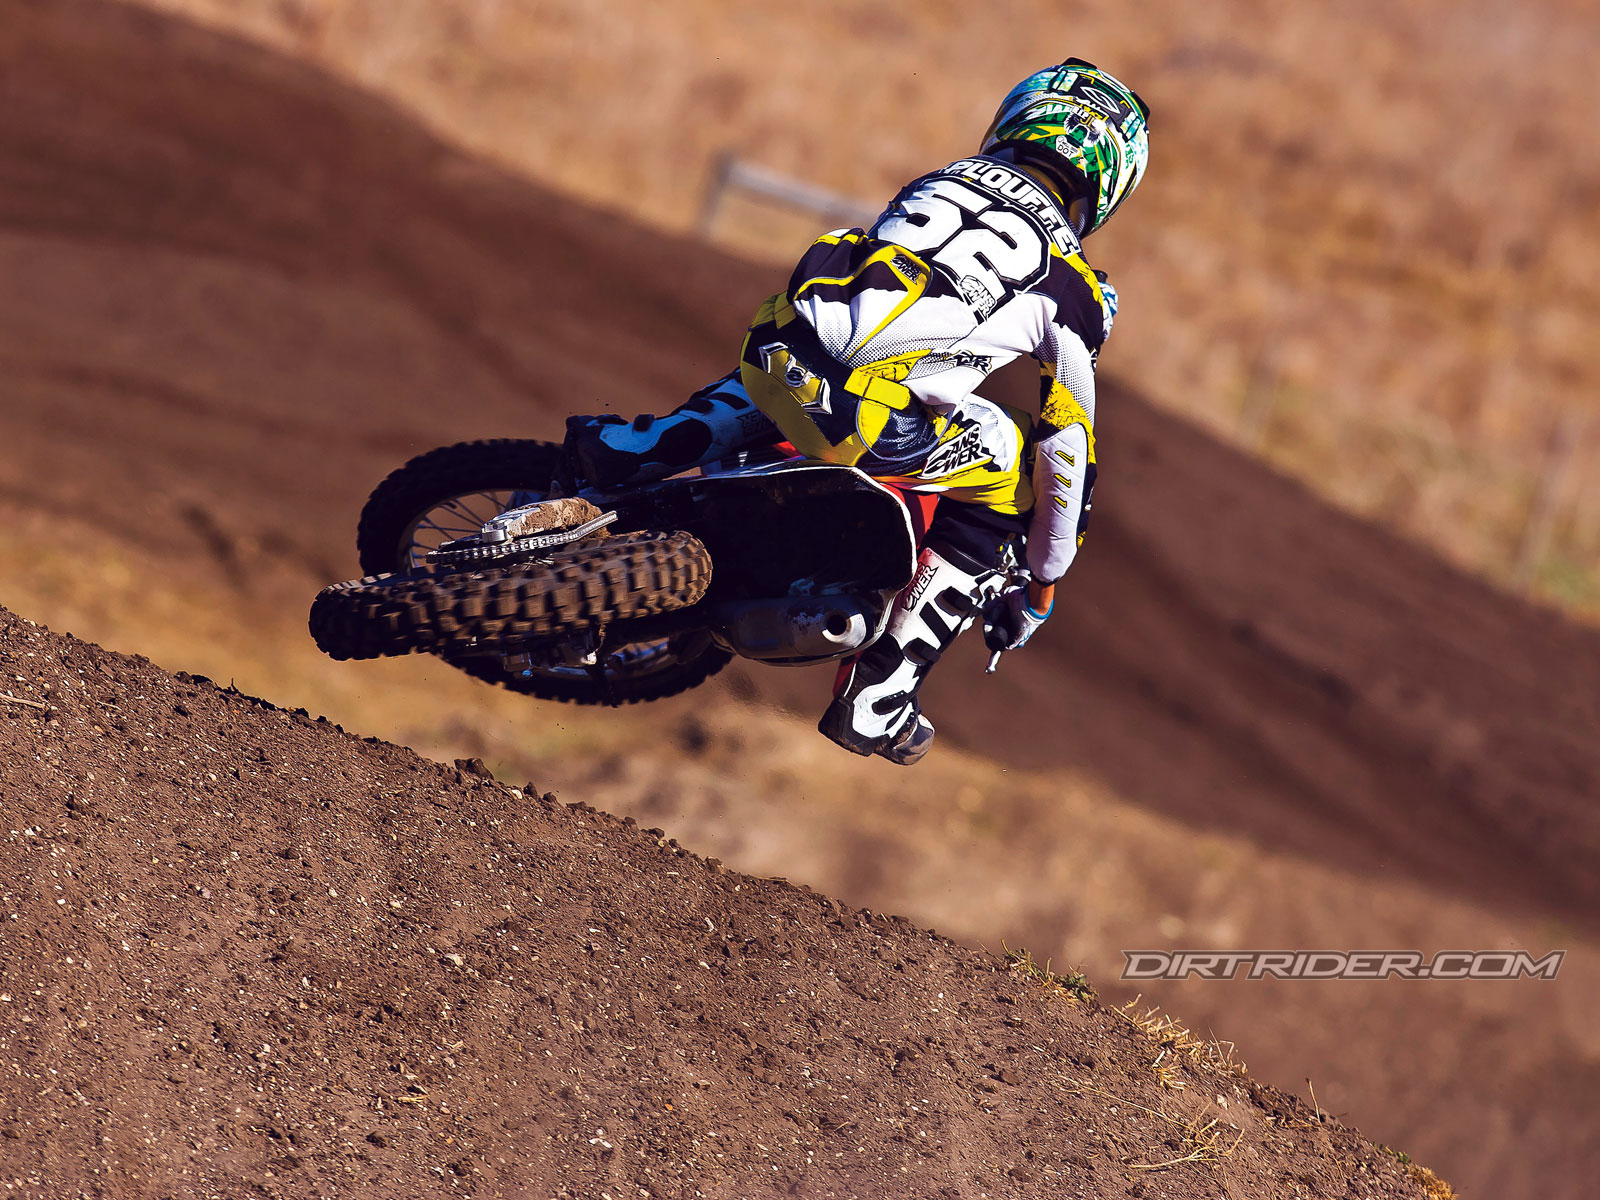 Dirt Bike Wallpaper Clickandseeworld Is All About Funny Amazing